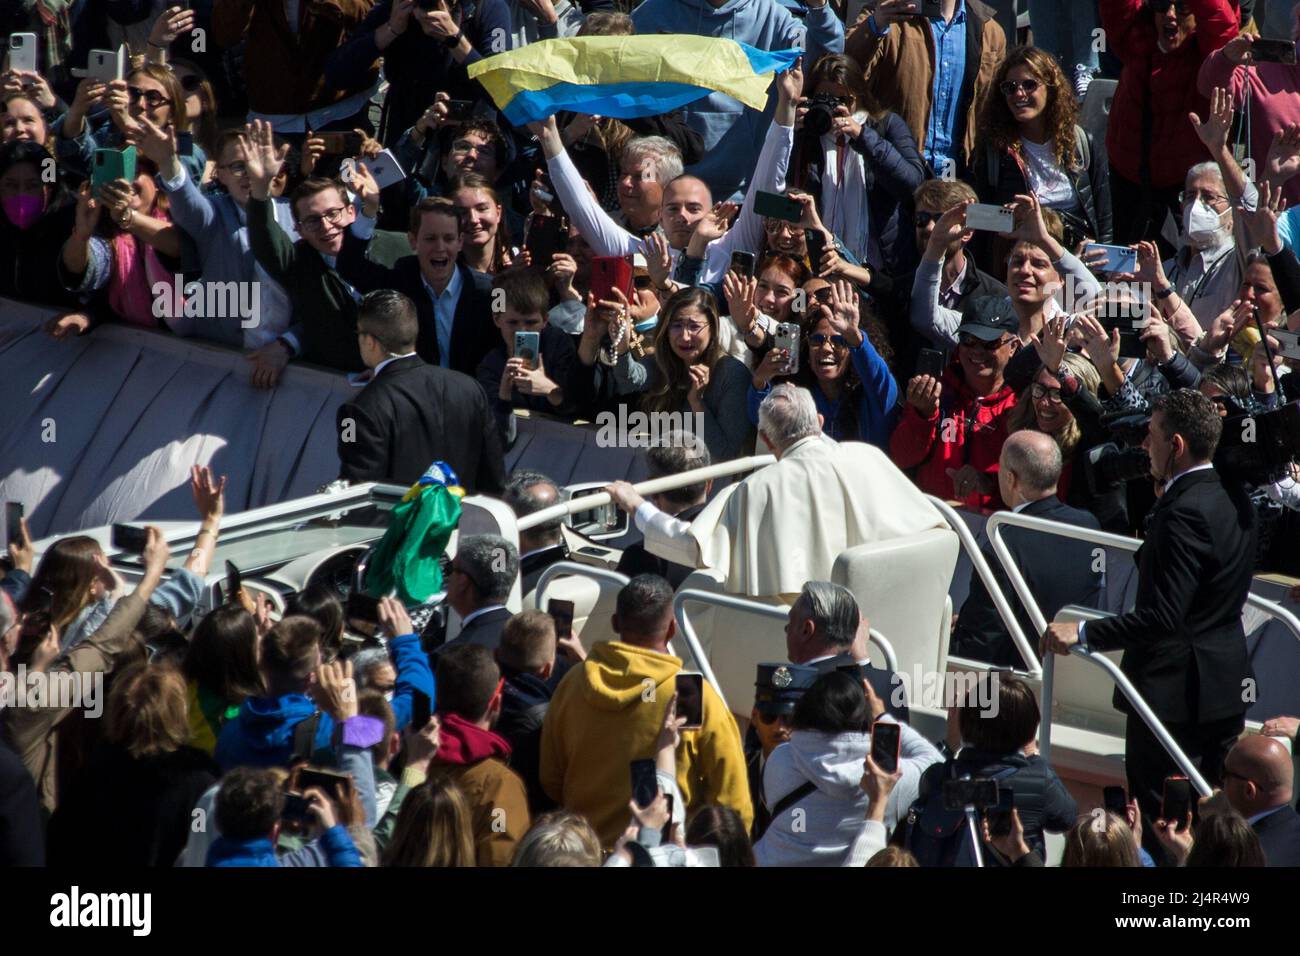 Rome, Italy. 17th Apr, 2022. Man waving Ukraine flag while Pope Francis drove through St. Peter’s Square in his Popemobile greeted by the joyful crowd. Credit: LSF Photo/Alamy Live News Stock Photo